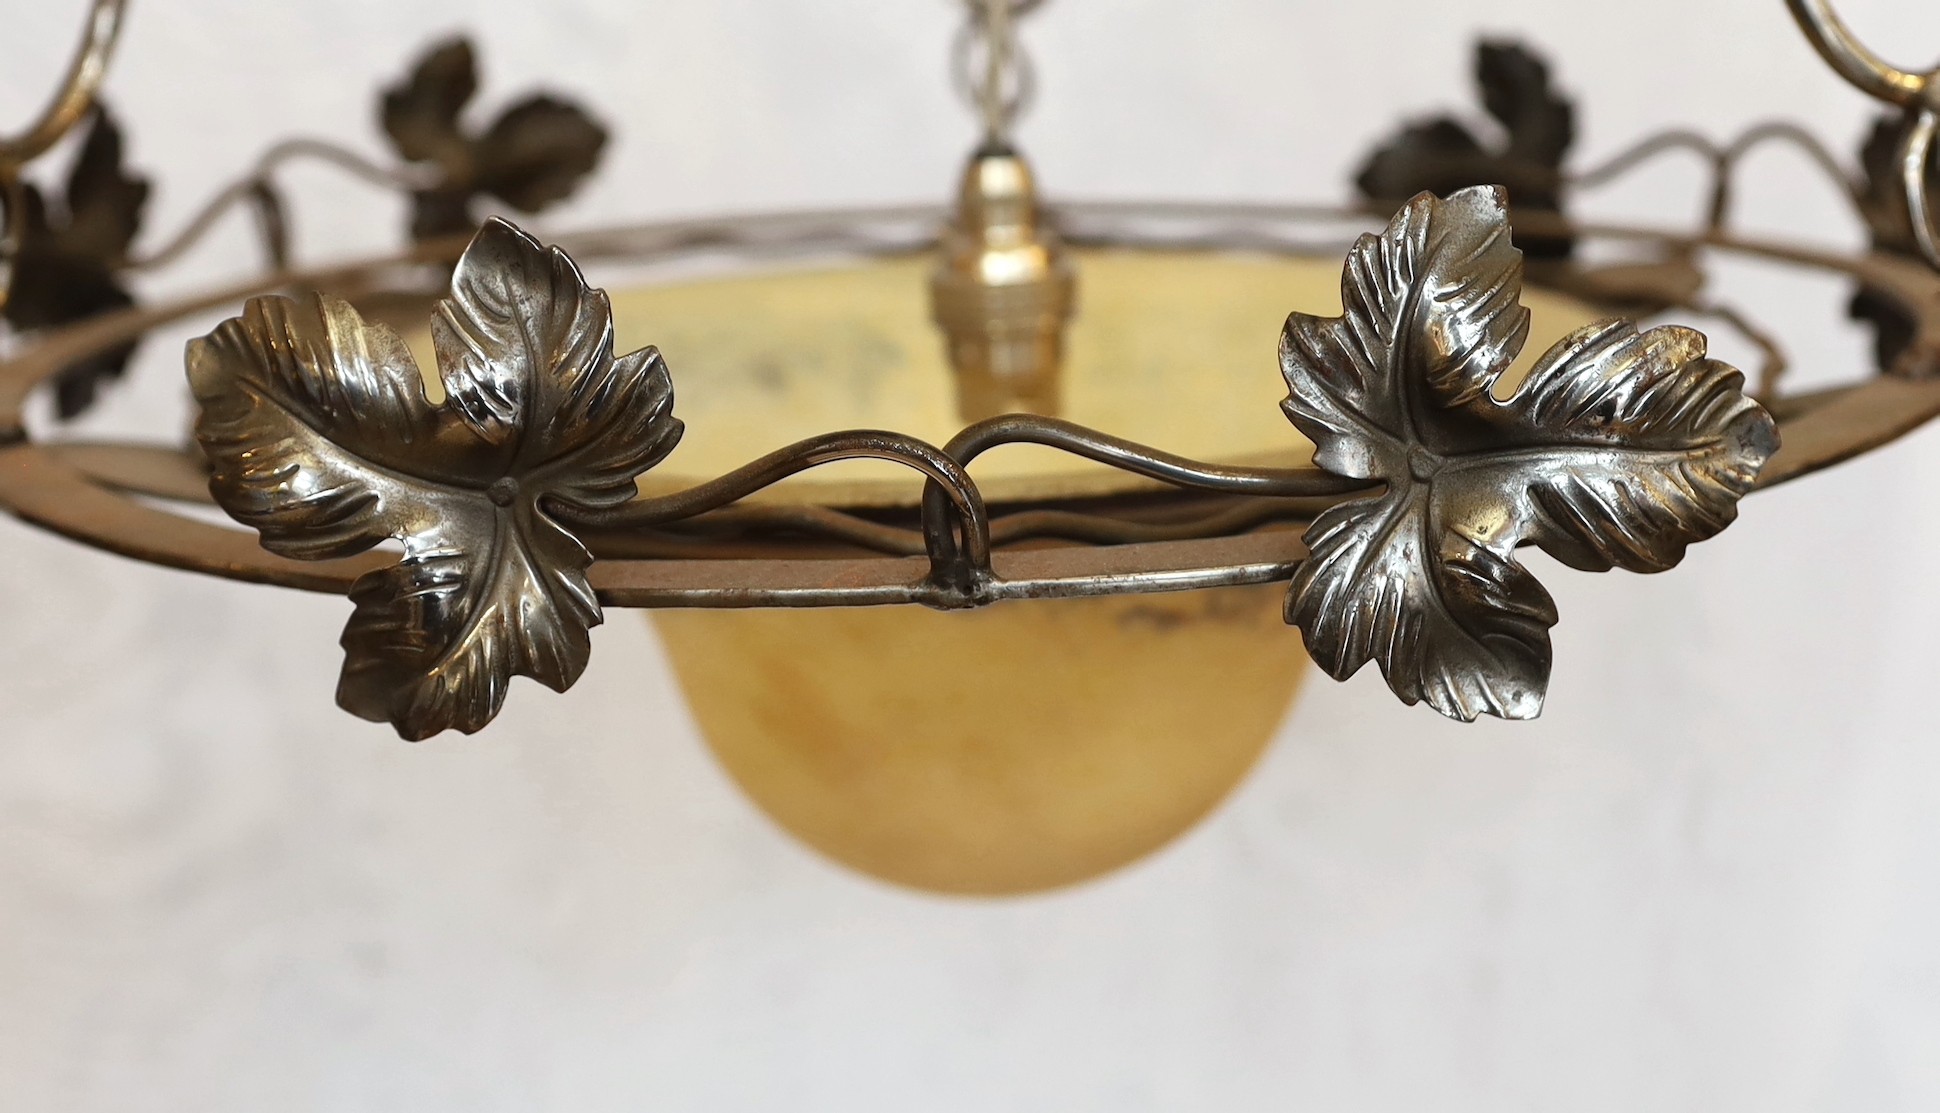 A 1920's-30's French polished wrought iron and marbled glass light fitting decorated with foliate motifs, drop 90cm, width 40cm